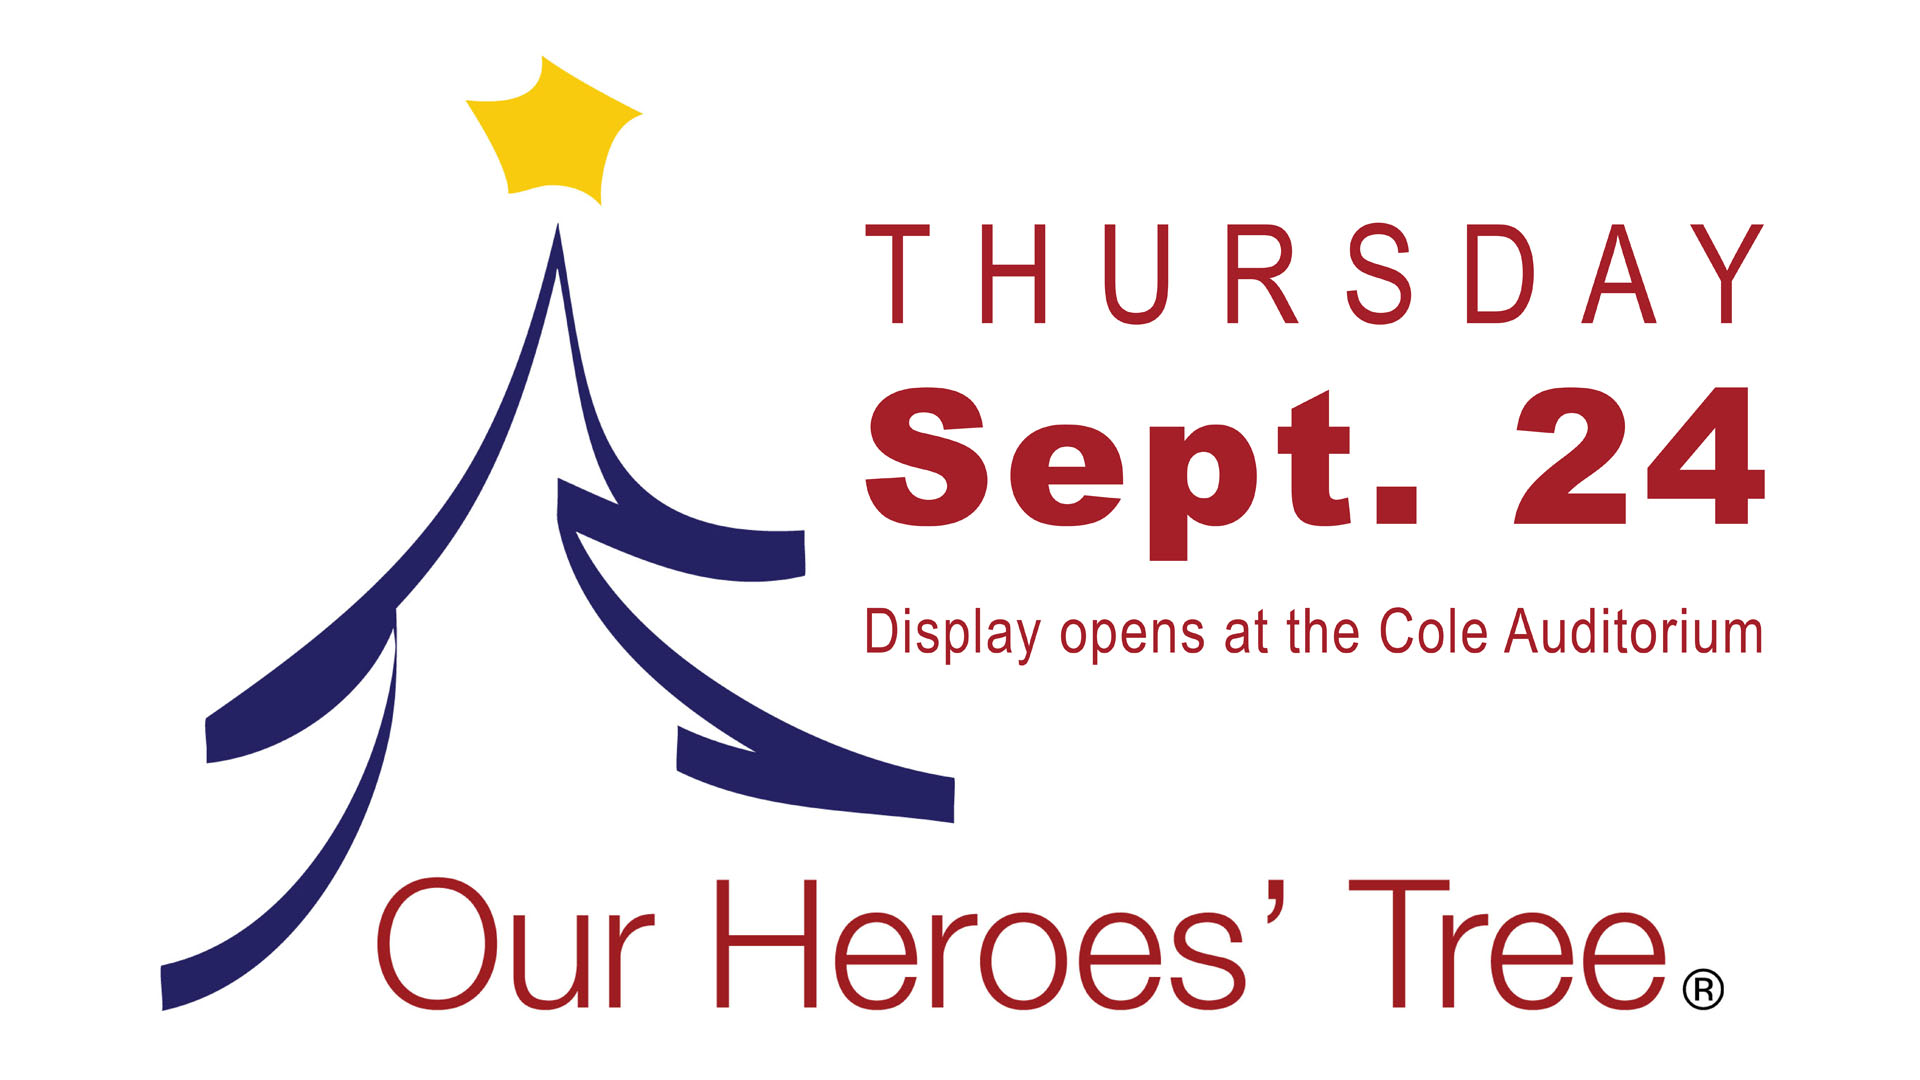 Our Heroes Tree logo and information about display opening Sept. 24 at the Cole Auditorium